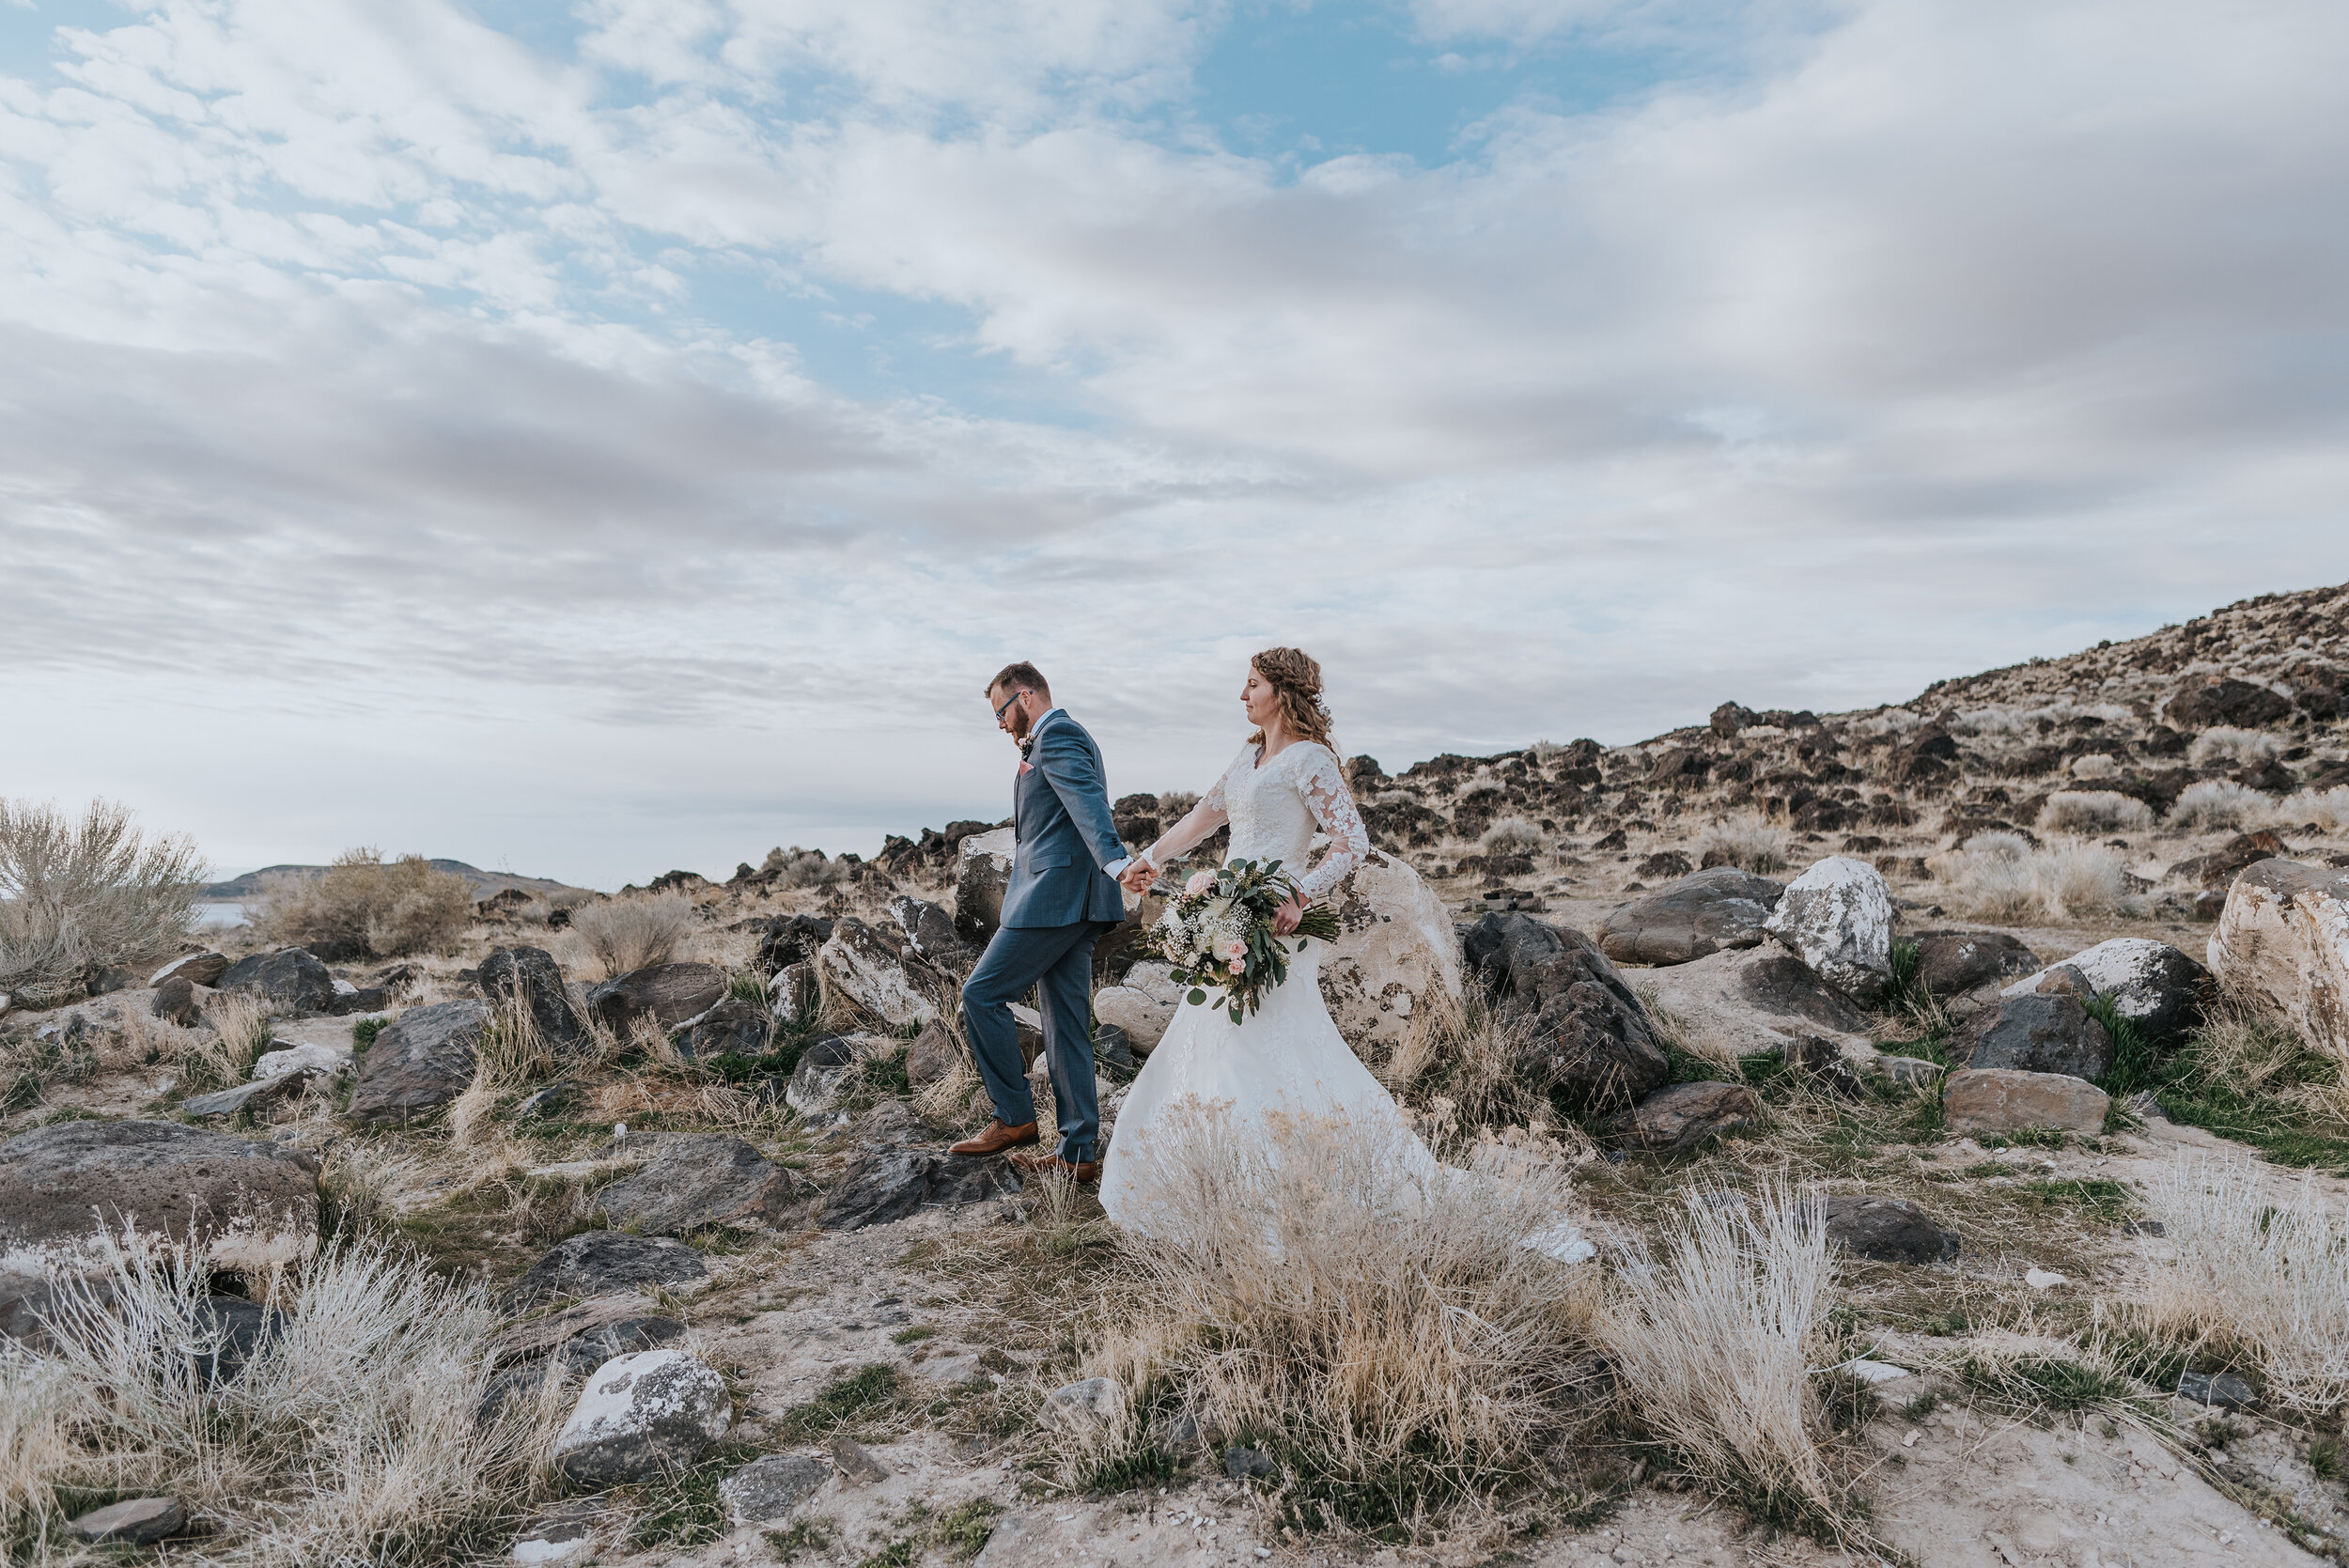 The natural beauty of the Spiral Jetty was complete with dimension and layers much like this stunning bride and groom during their wedding formals. wedding formal photoshoot in Spiral Jetty Northern Utah Great Salt Lake photography wedding formals natural photo aesthetic bride and groom #spiraljetty #utahphotography #weddingformals #gettingmarried #weddingattire #utahwedding #greatoutdoorswedding #weddingformalsphotoshoot #naturalbeauty